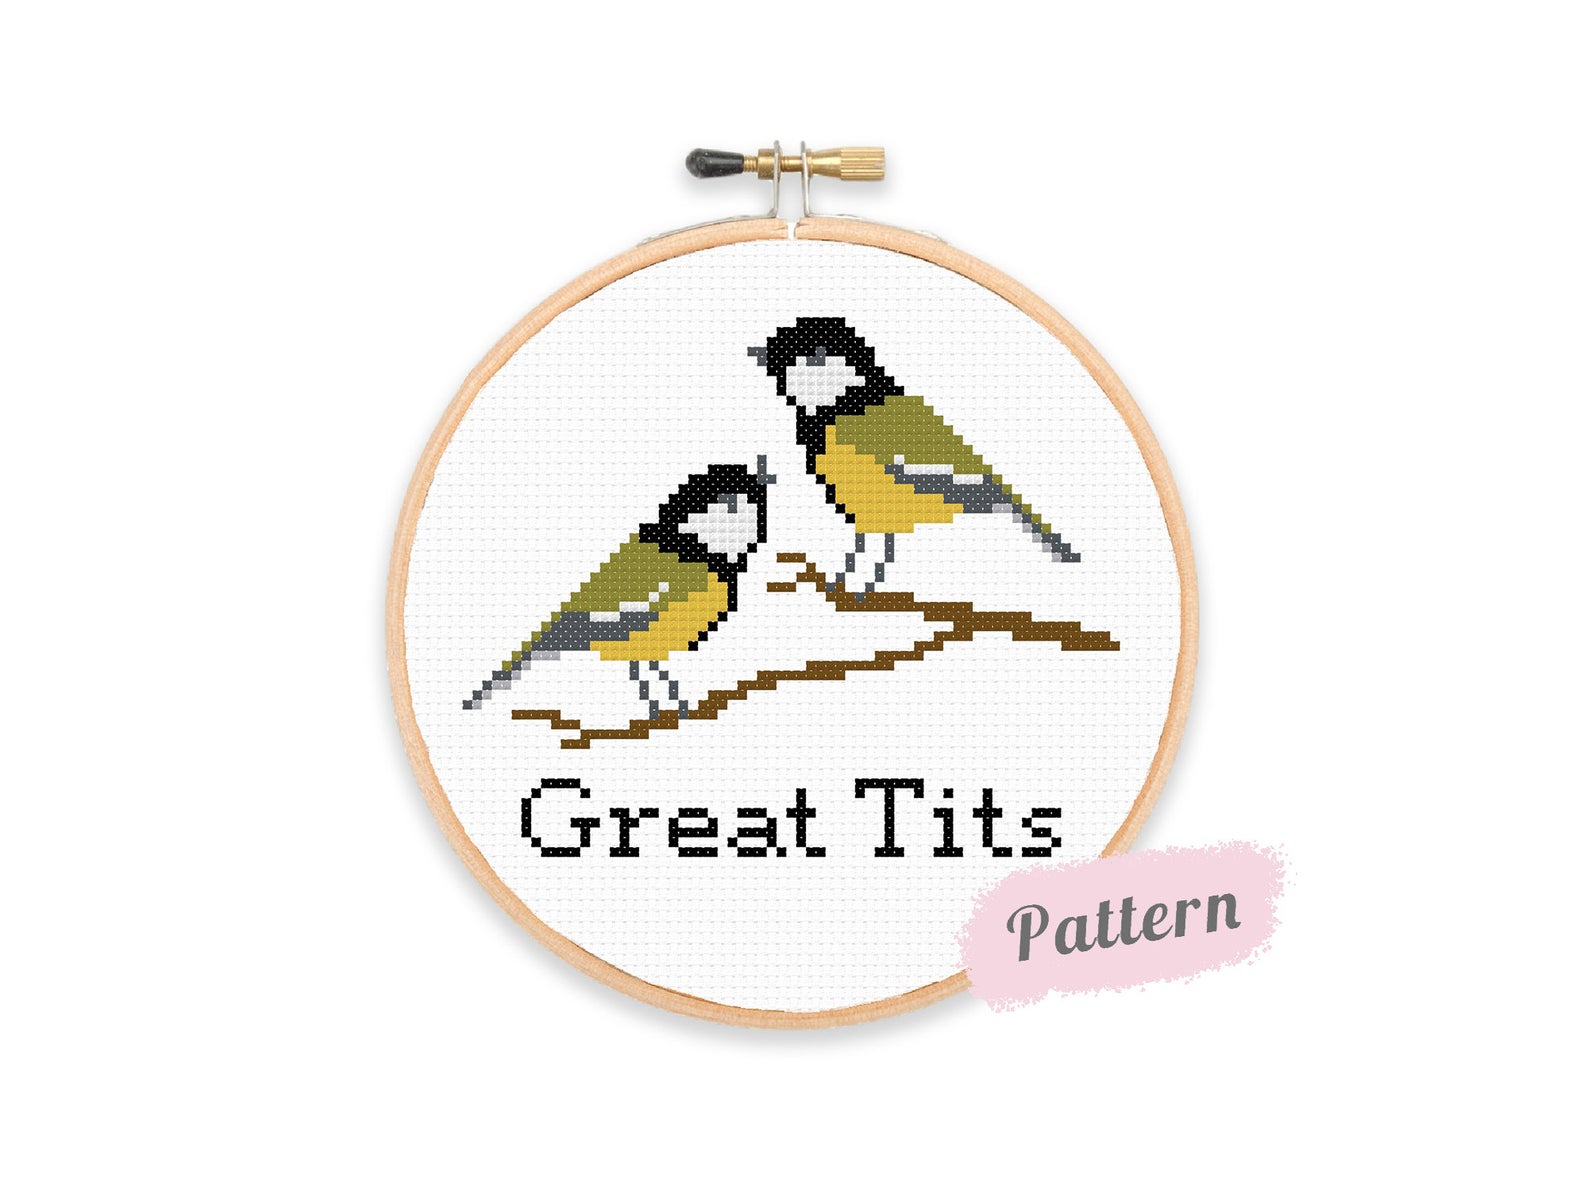 two birds and the words great tits